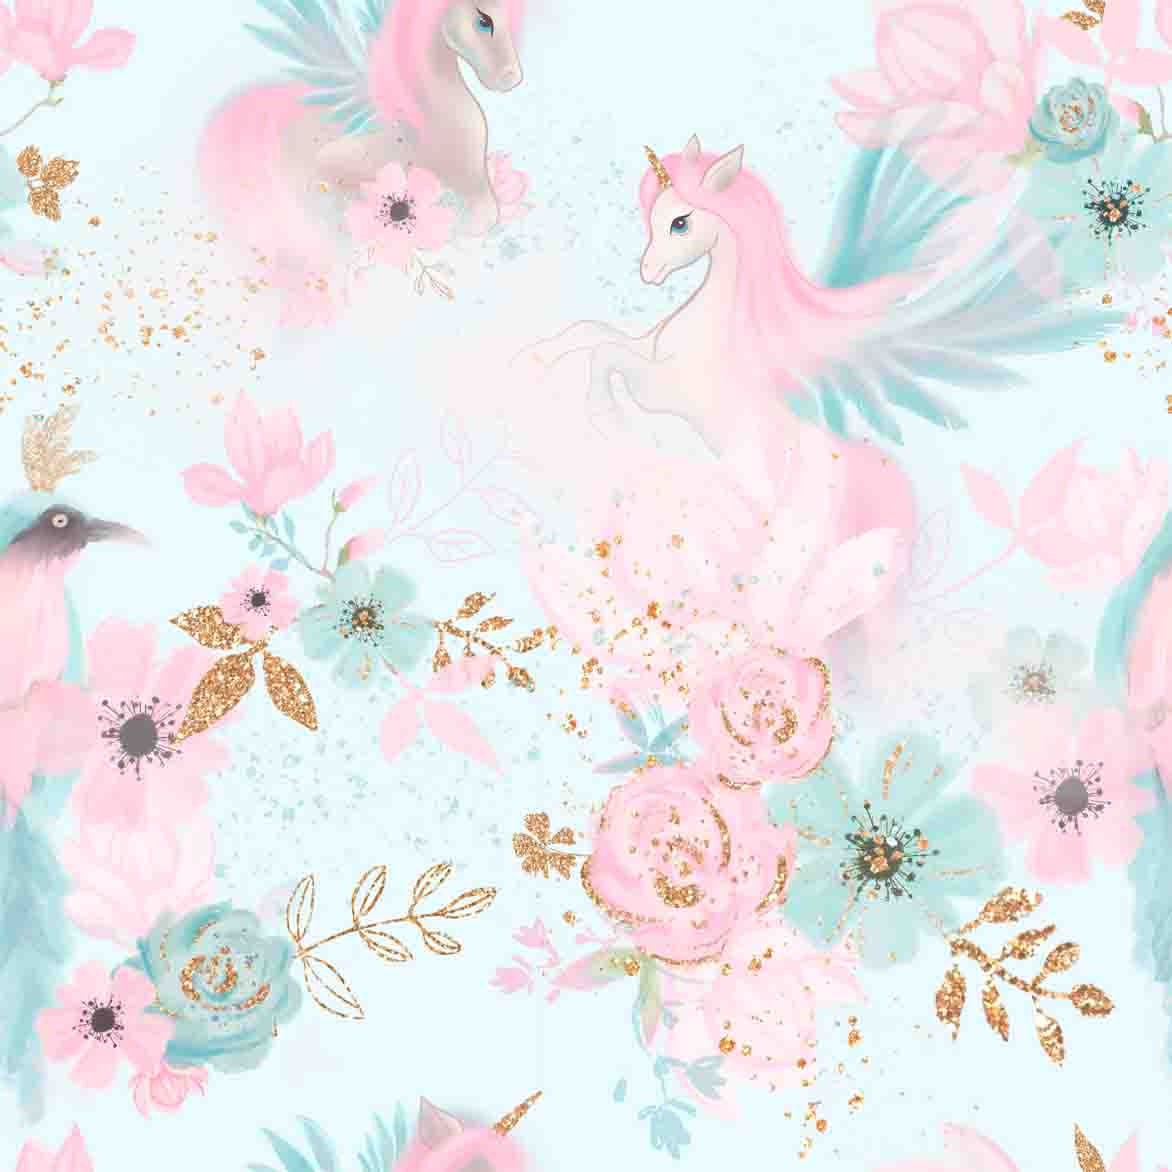 Girls Pink and Blue Unicorn and Flowers Wallpaper Bedroom Mural